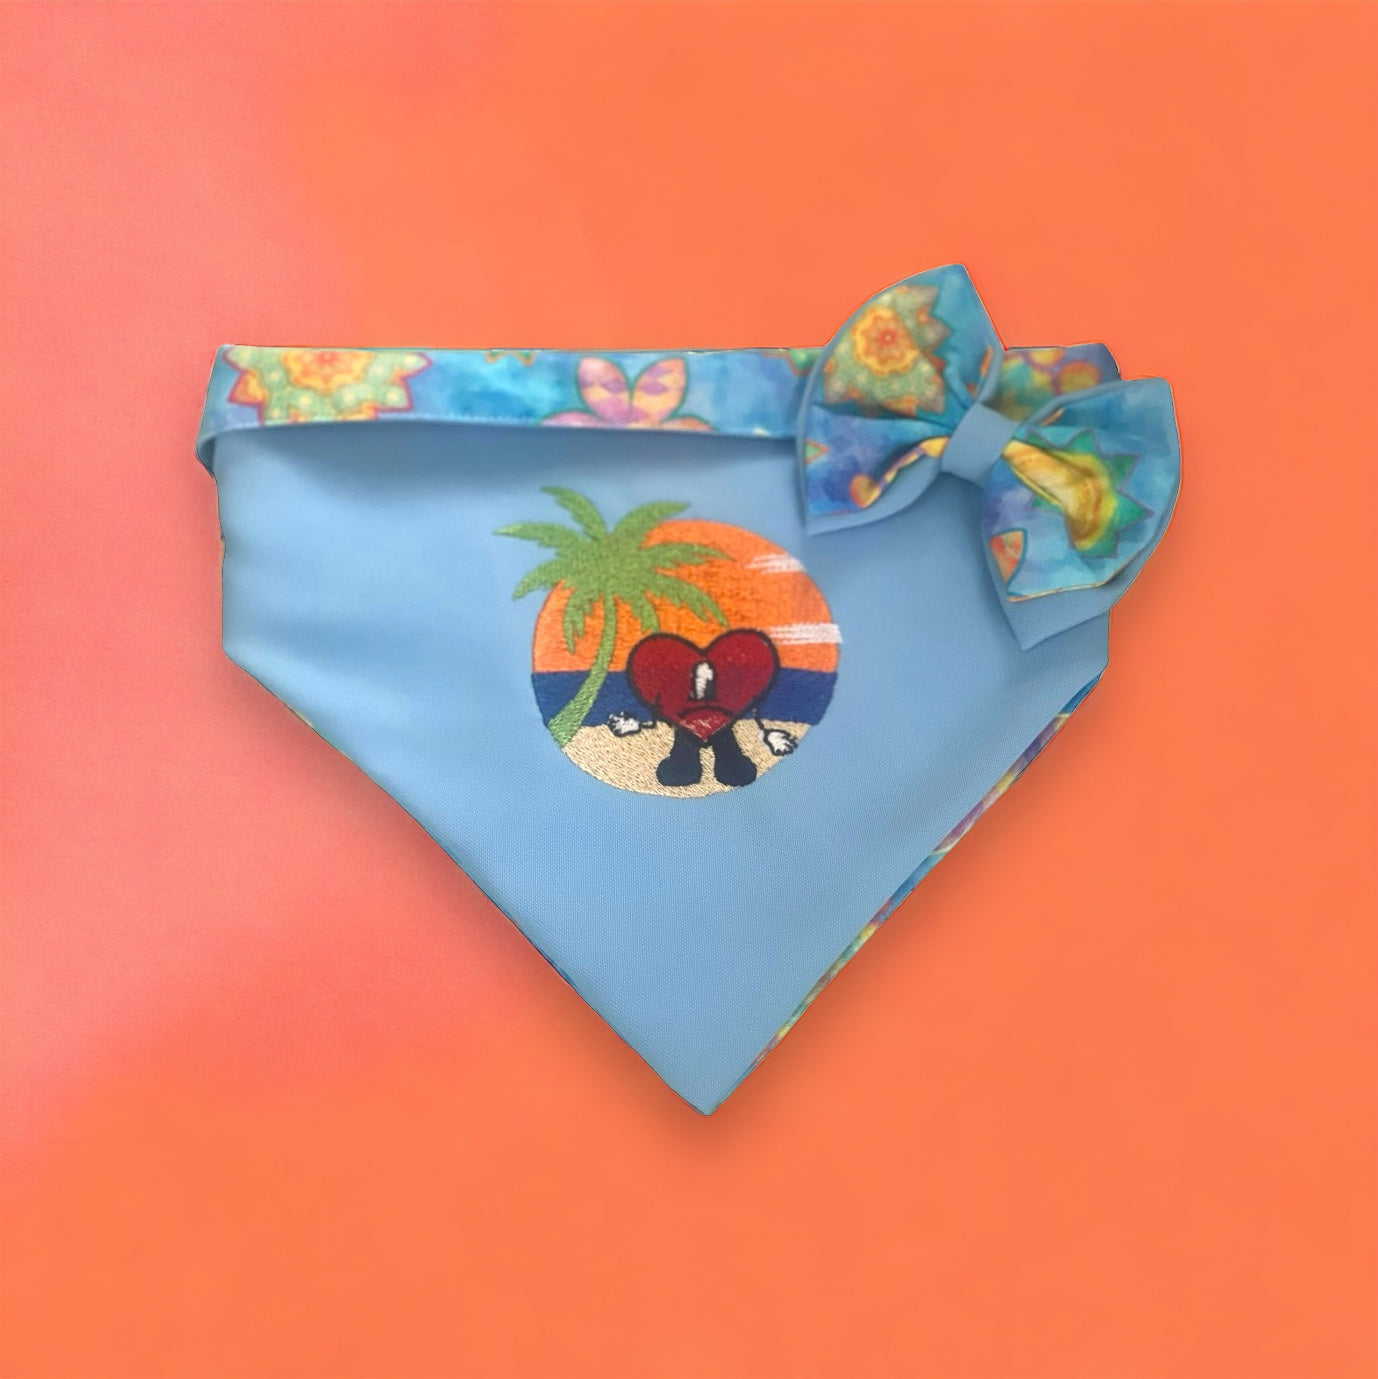 Bandana “In Summer with you” 2in1